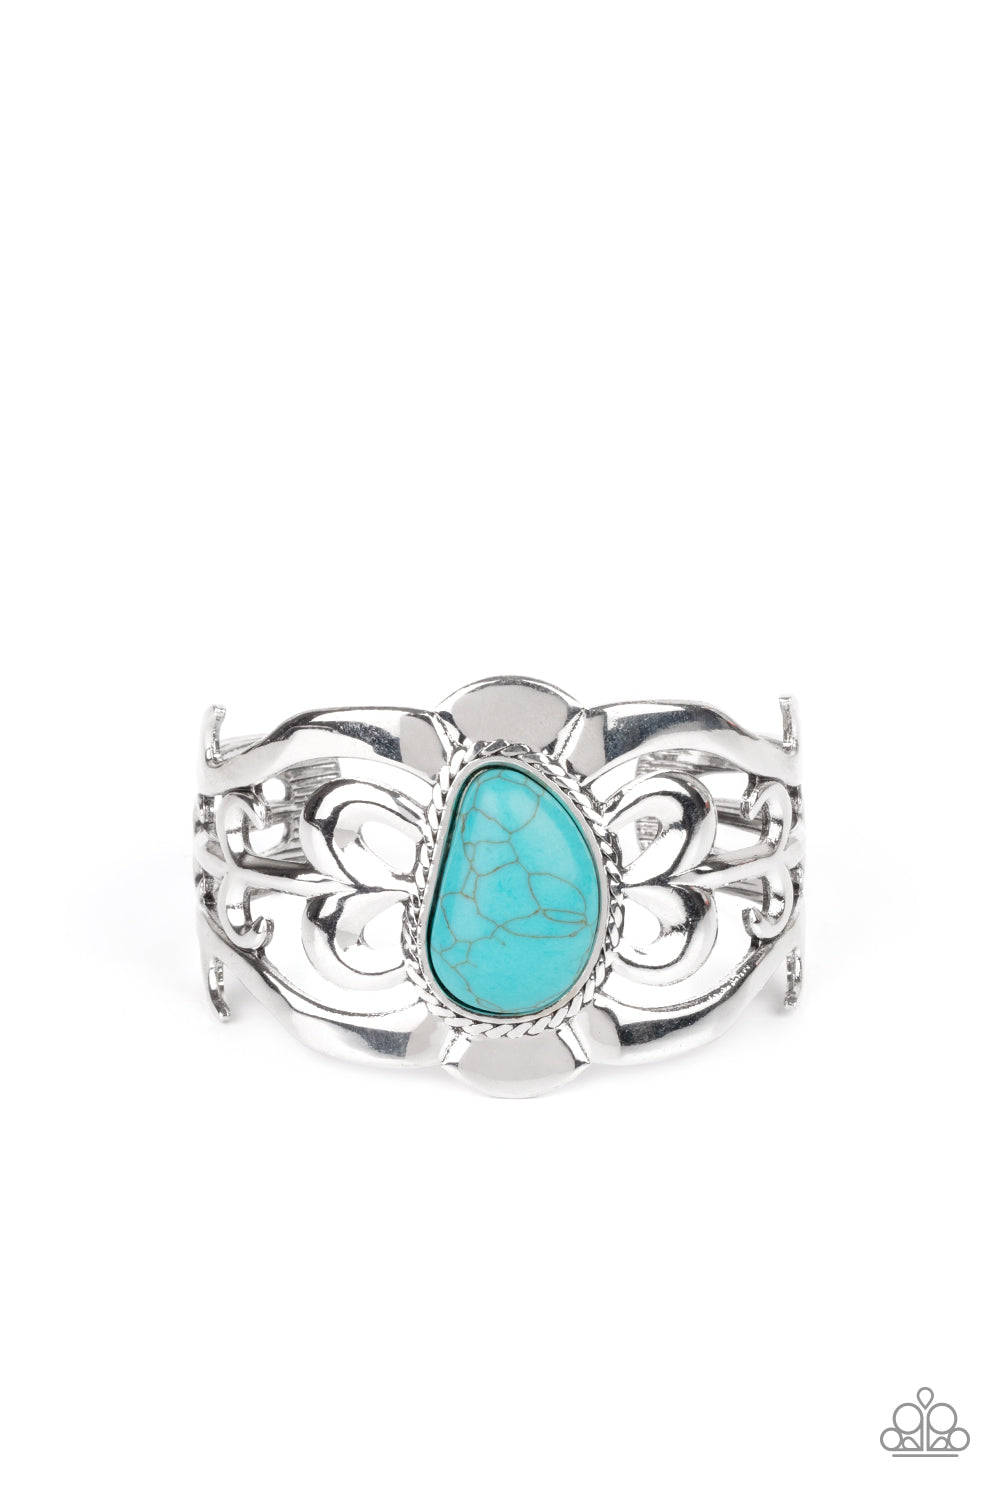 The MESAS are Calling Blue Cuff Bracelet - Paparazzi Accessories  An asymmetrical turquoise stone is pressed into the center of a silver cuff layered with filigree patterns around the wrist for a rustic flair.  ﻿All Paparazzi Accessories are lead free and nickel free!  Sold as one individual bracelet.